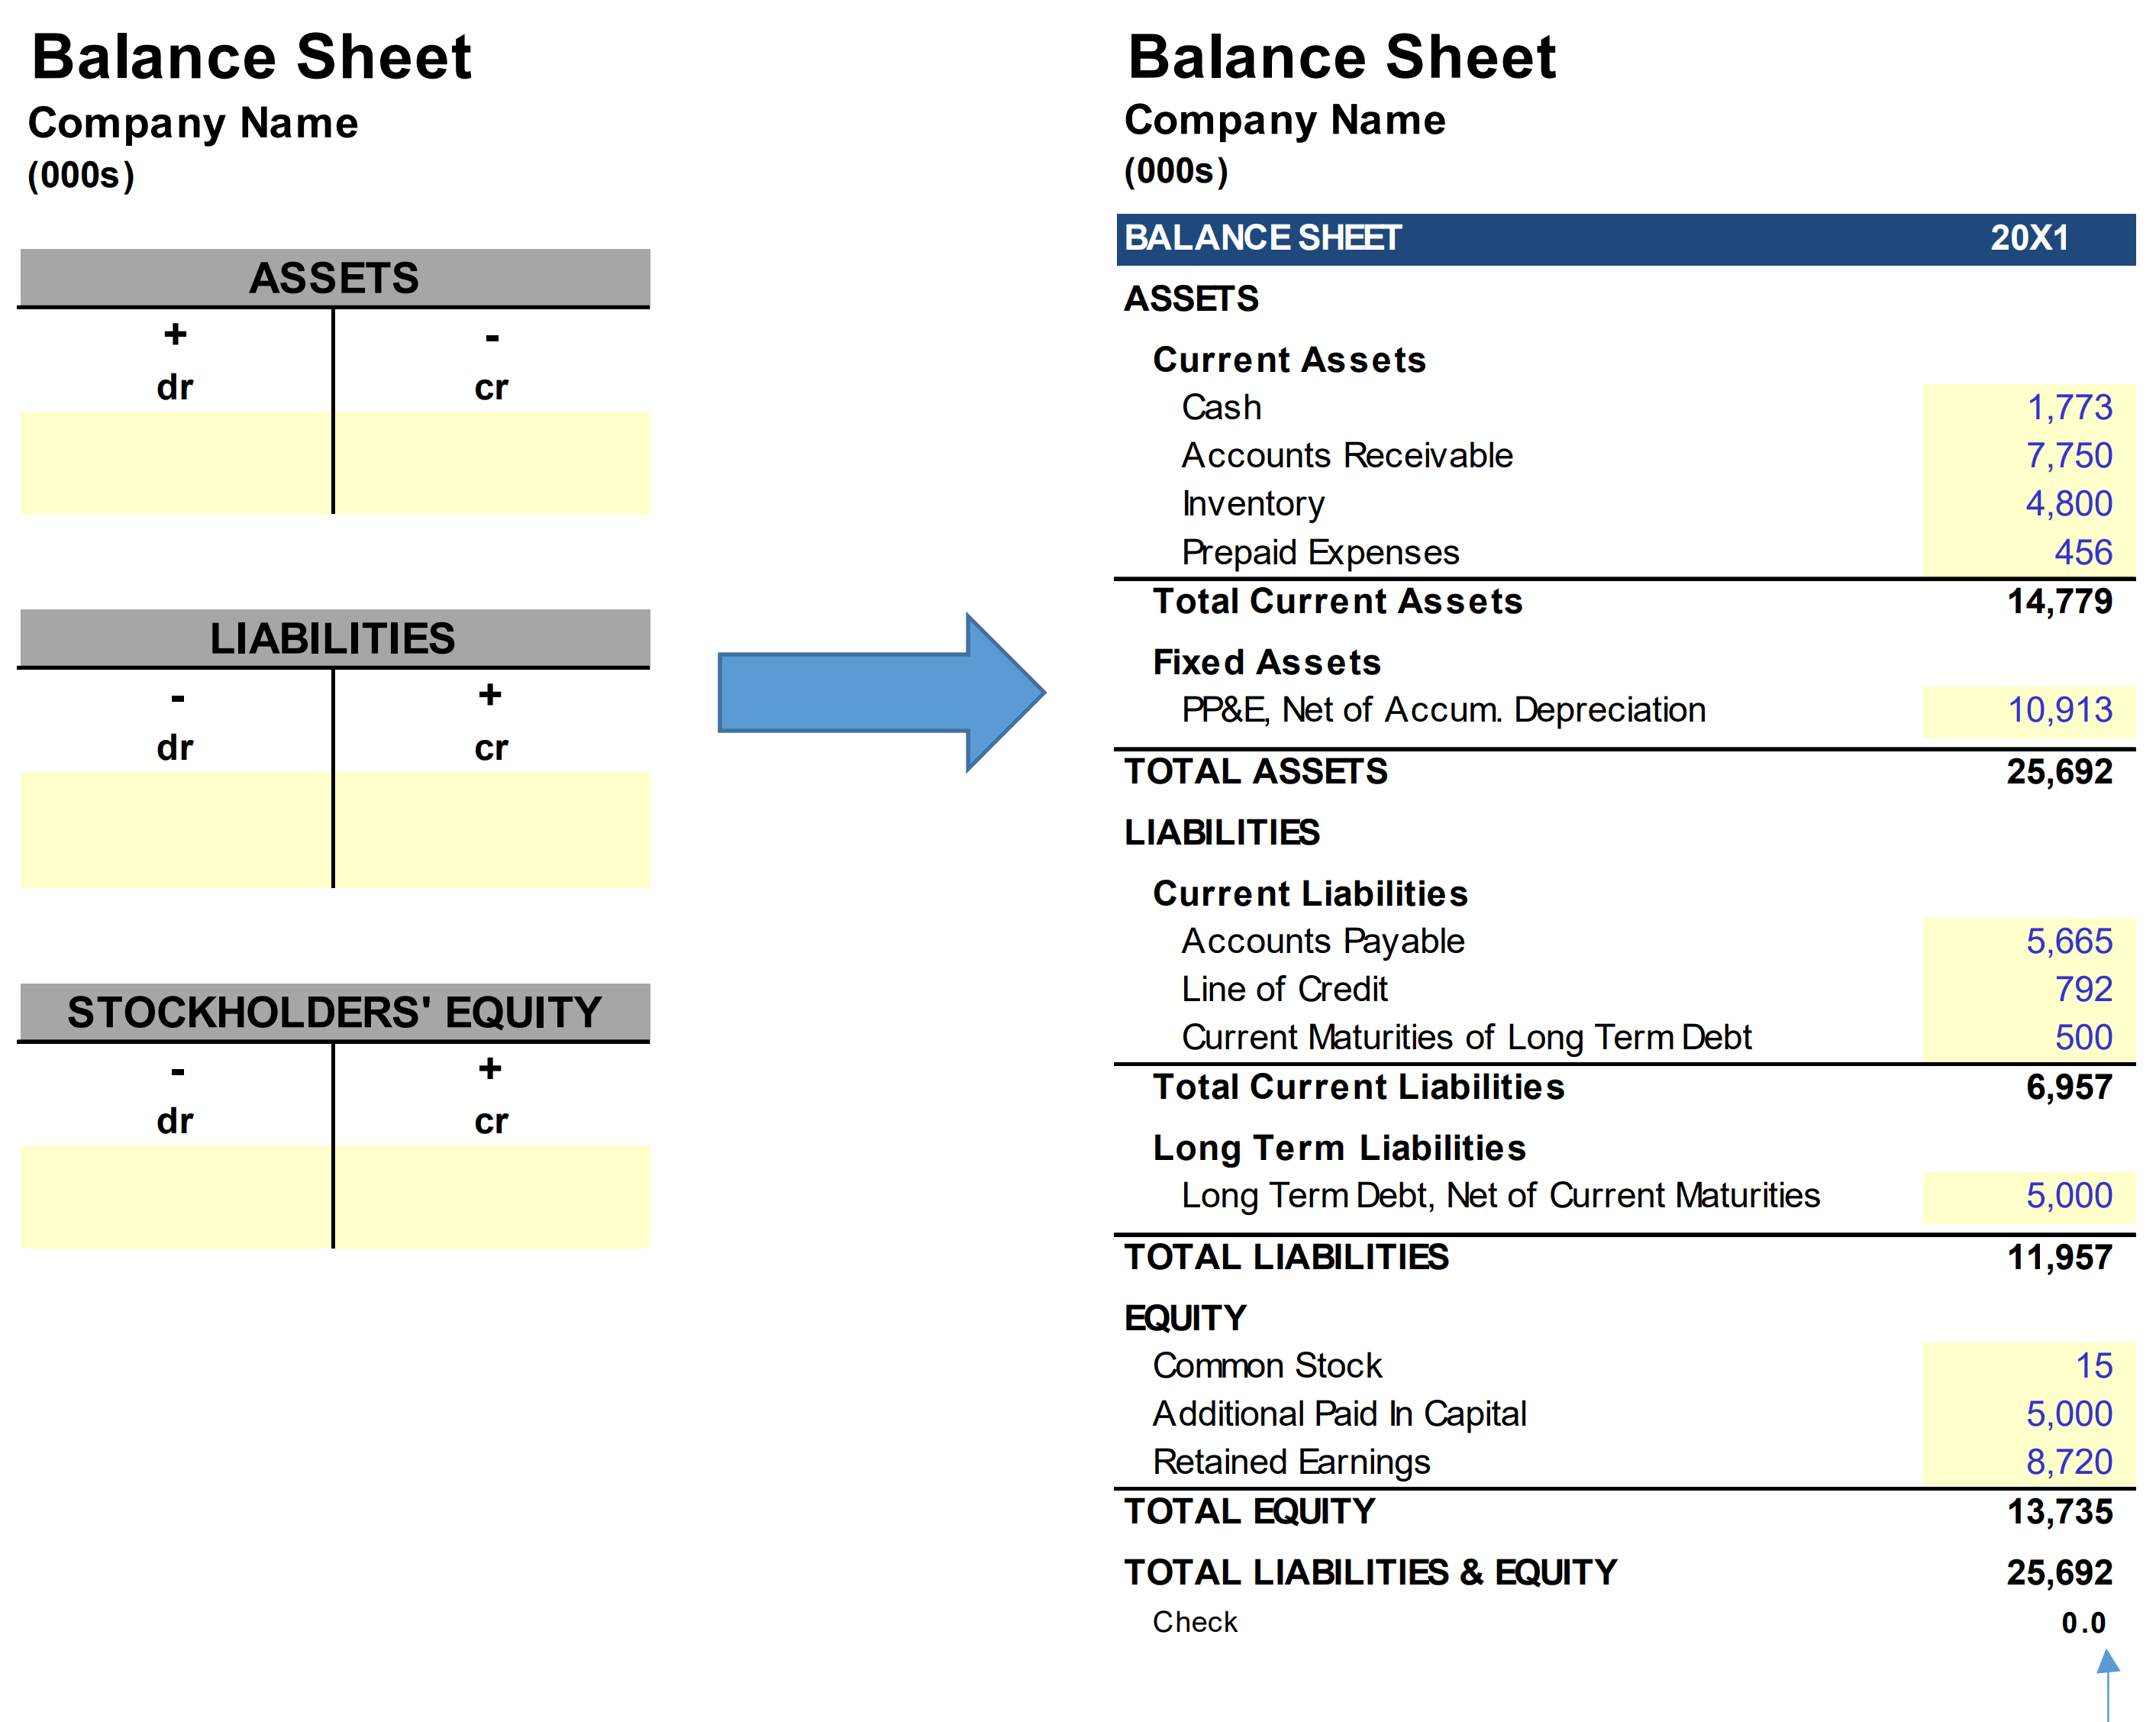 The Balance Sheet and the Accounting Equation